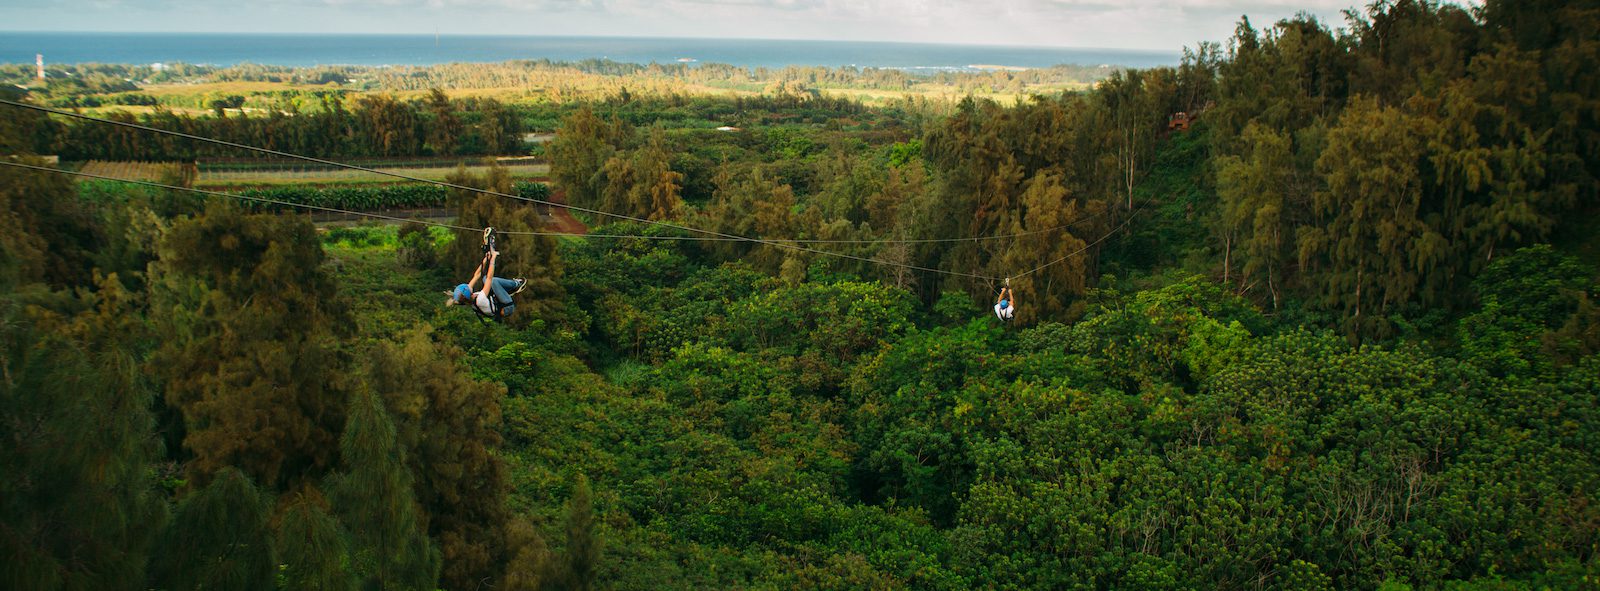 4 Things You’ll Gain from Our Oahu Zipline Tour